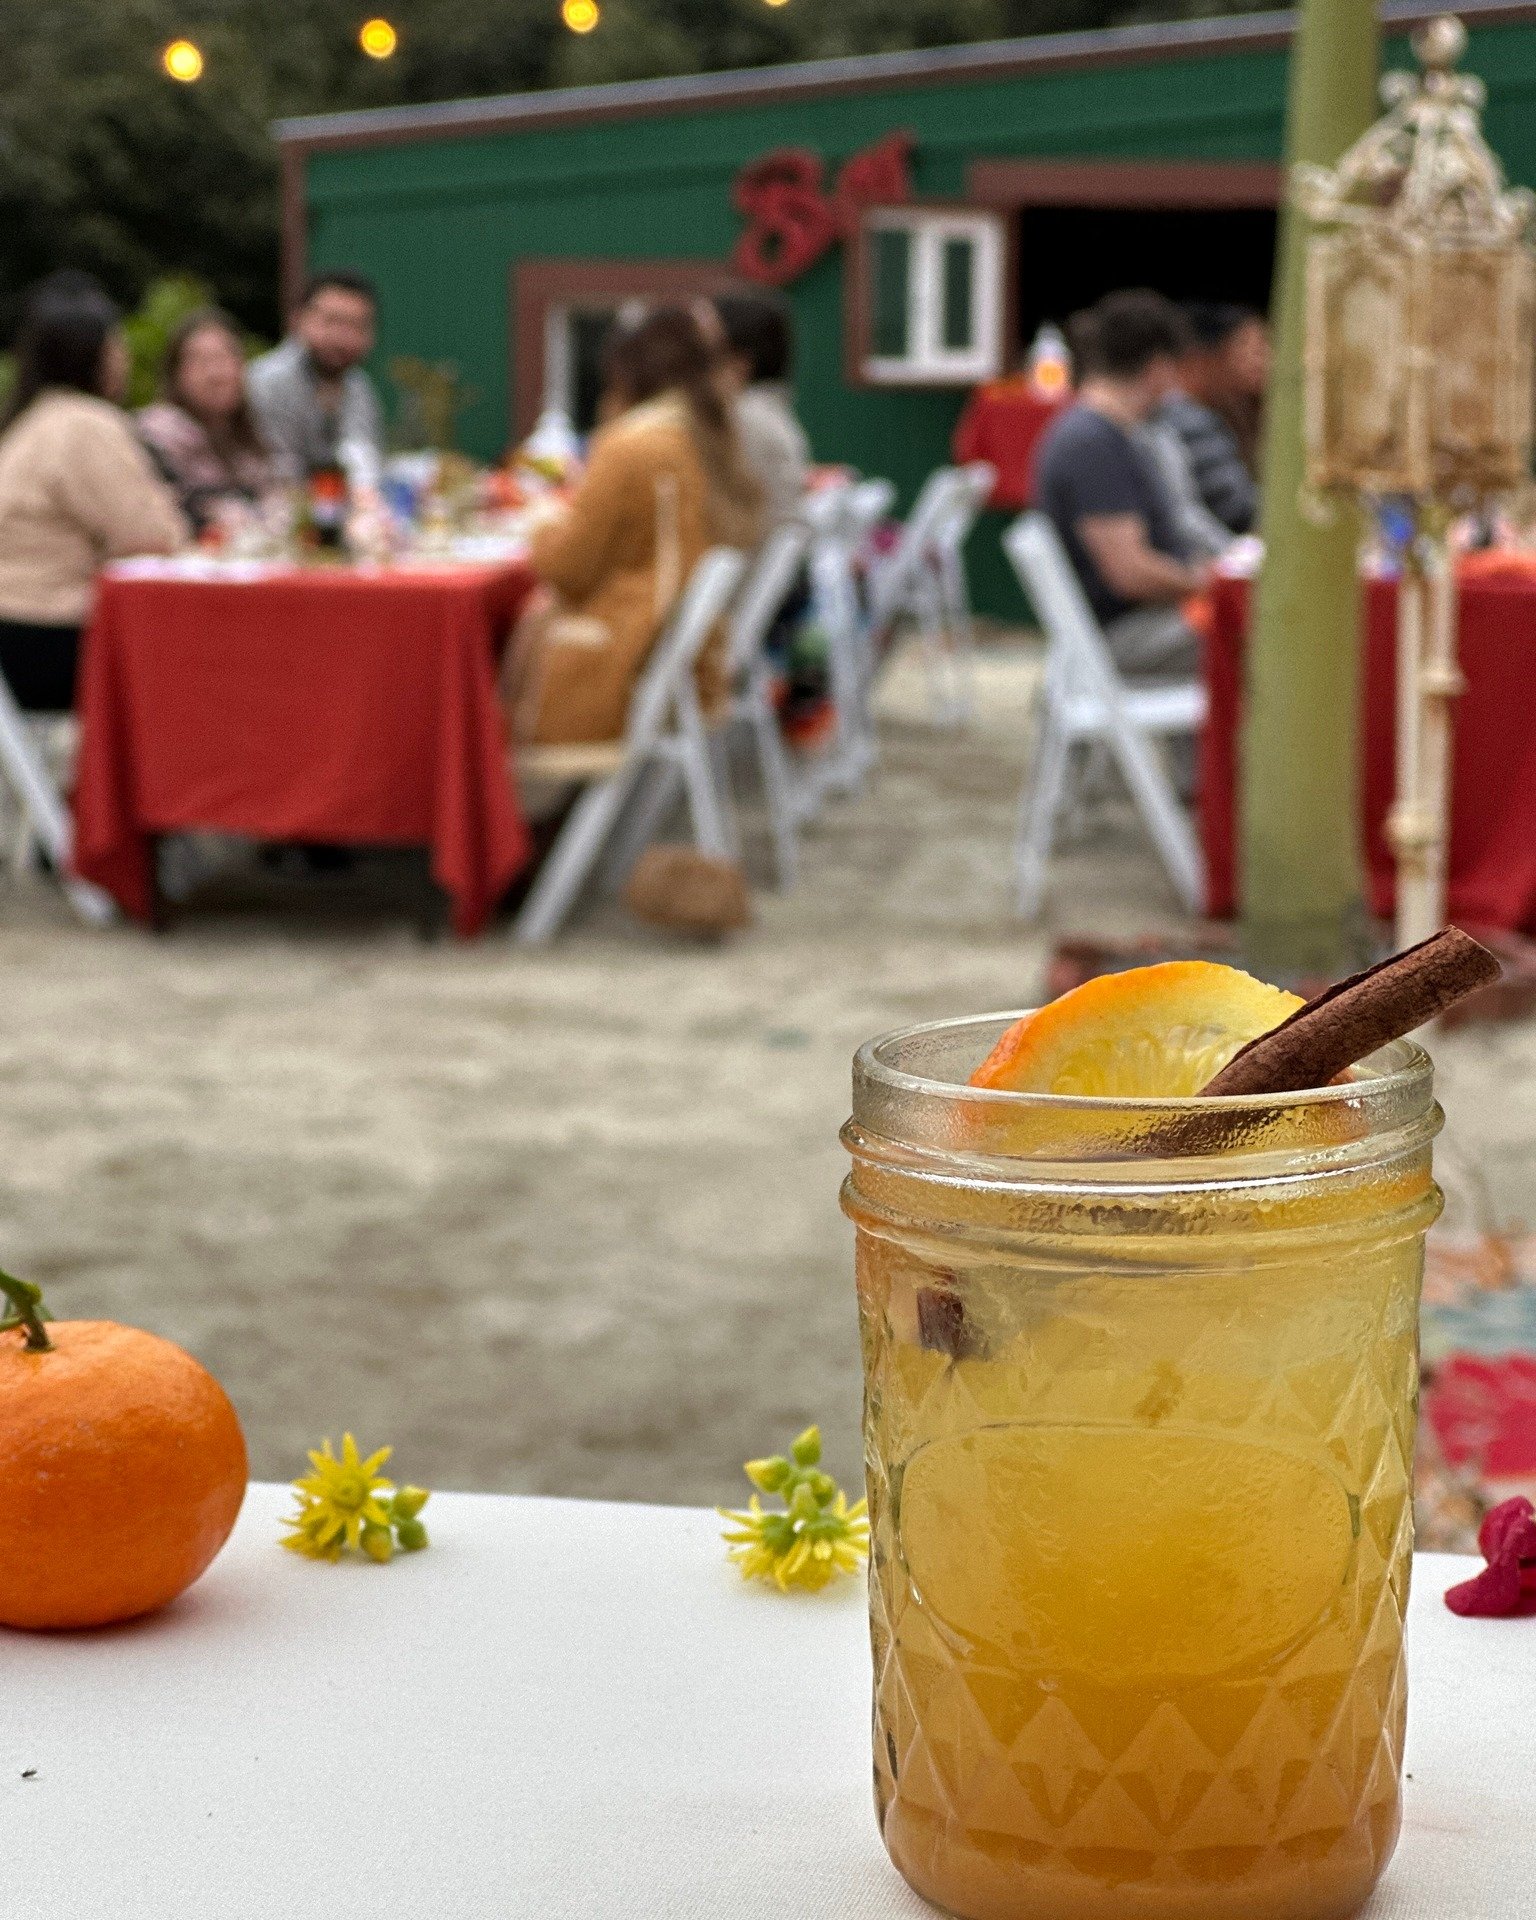 You found the perfect menu, but what about the drinks? From cocktails to mocktails, and seasonal beverages, we can help you come up with a delicious and refreshing drink menu that complements your event dishes.

Comment the word DRINK and we&rsquo;ll